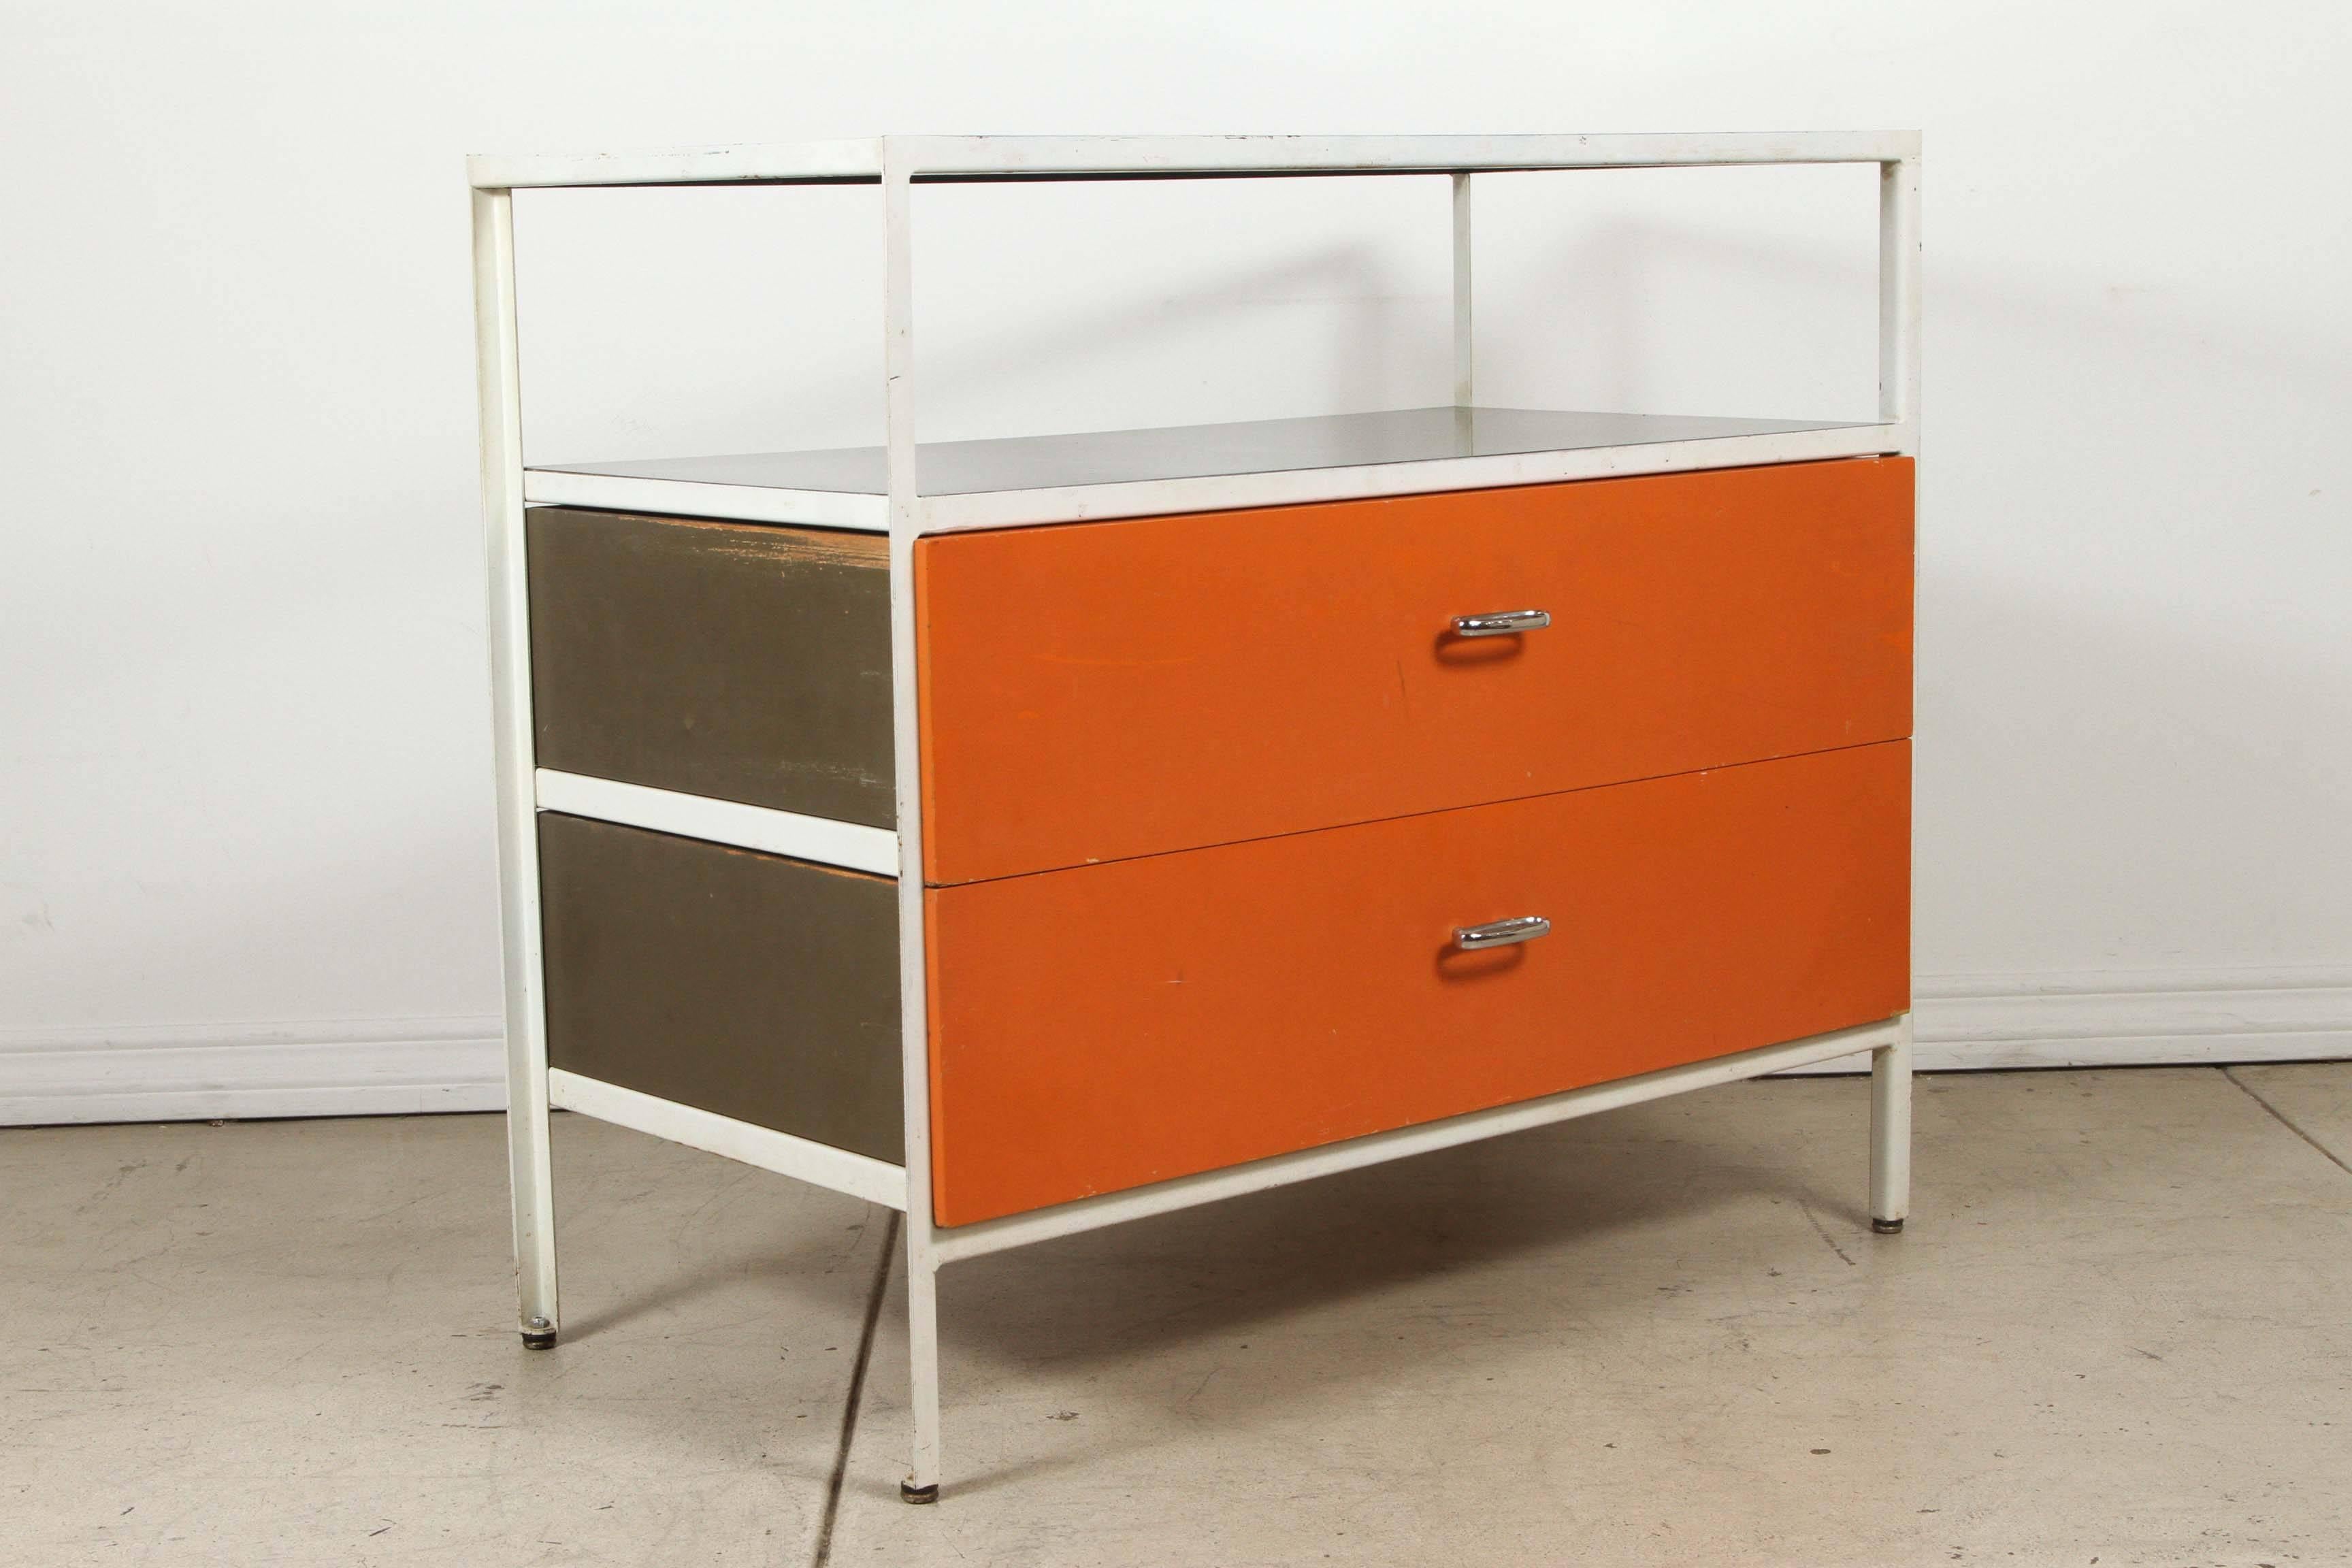 Classic Nelson series 4000 steel frame case for Herman Miller. Original label partially intact. Two drawers with original chrome pulls in iconic HM orange with glass top/shelf.